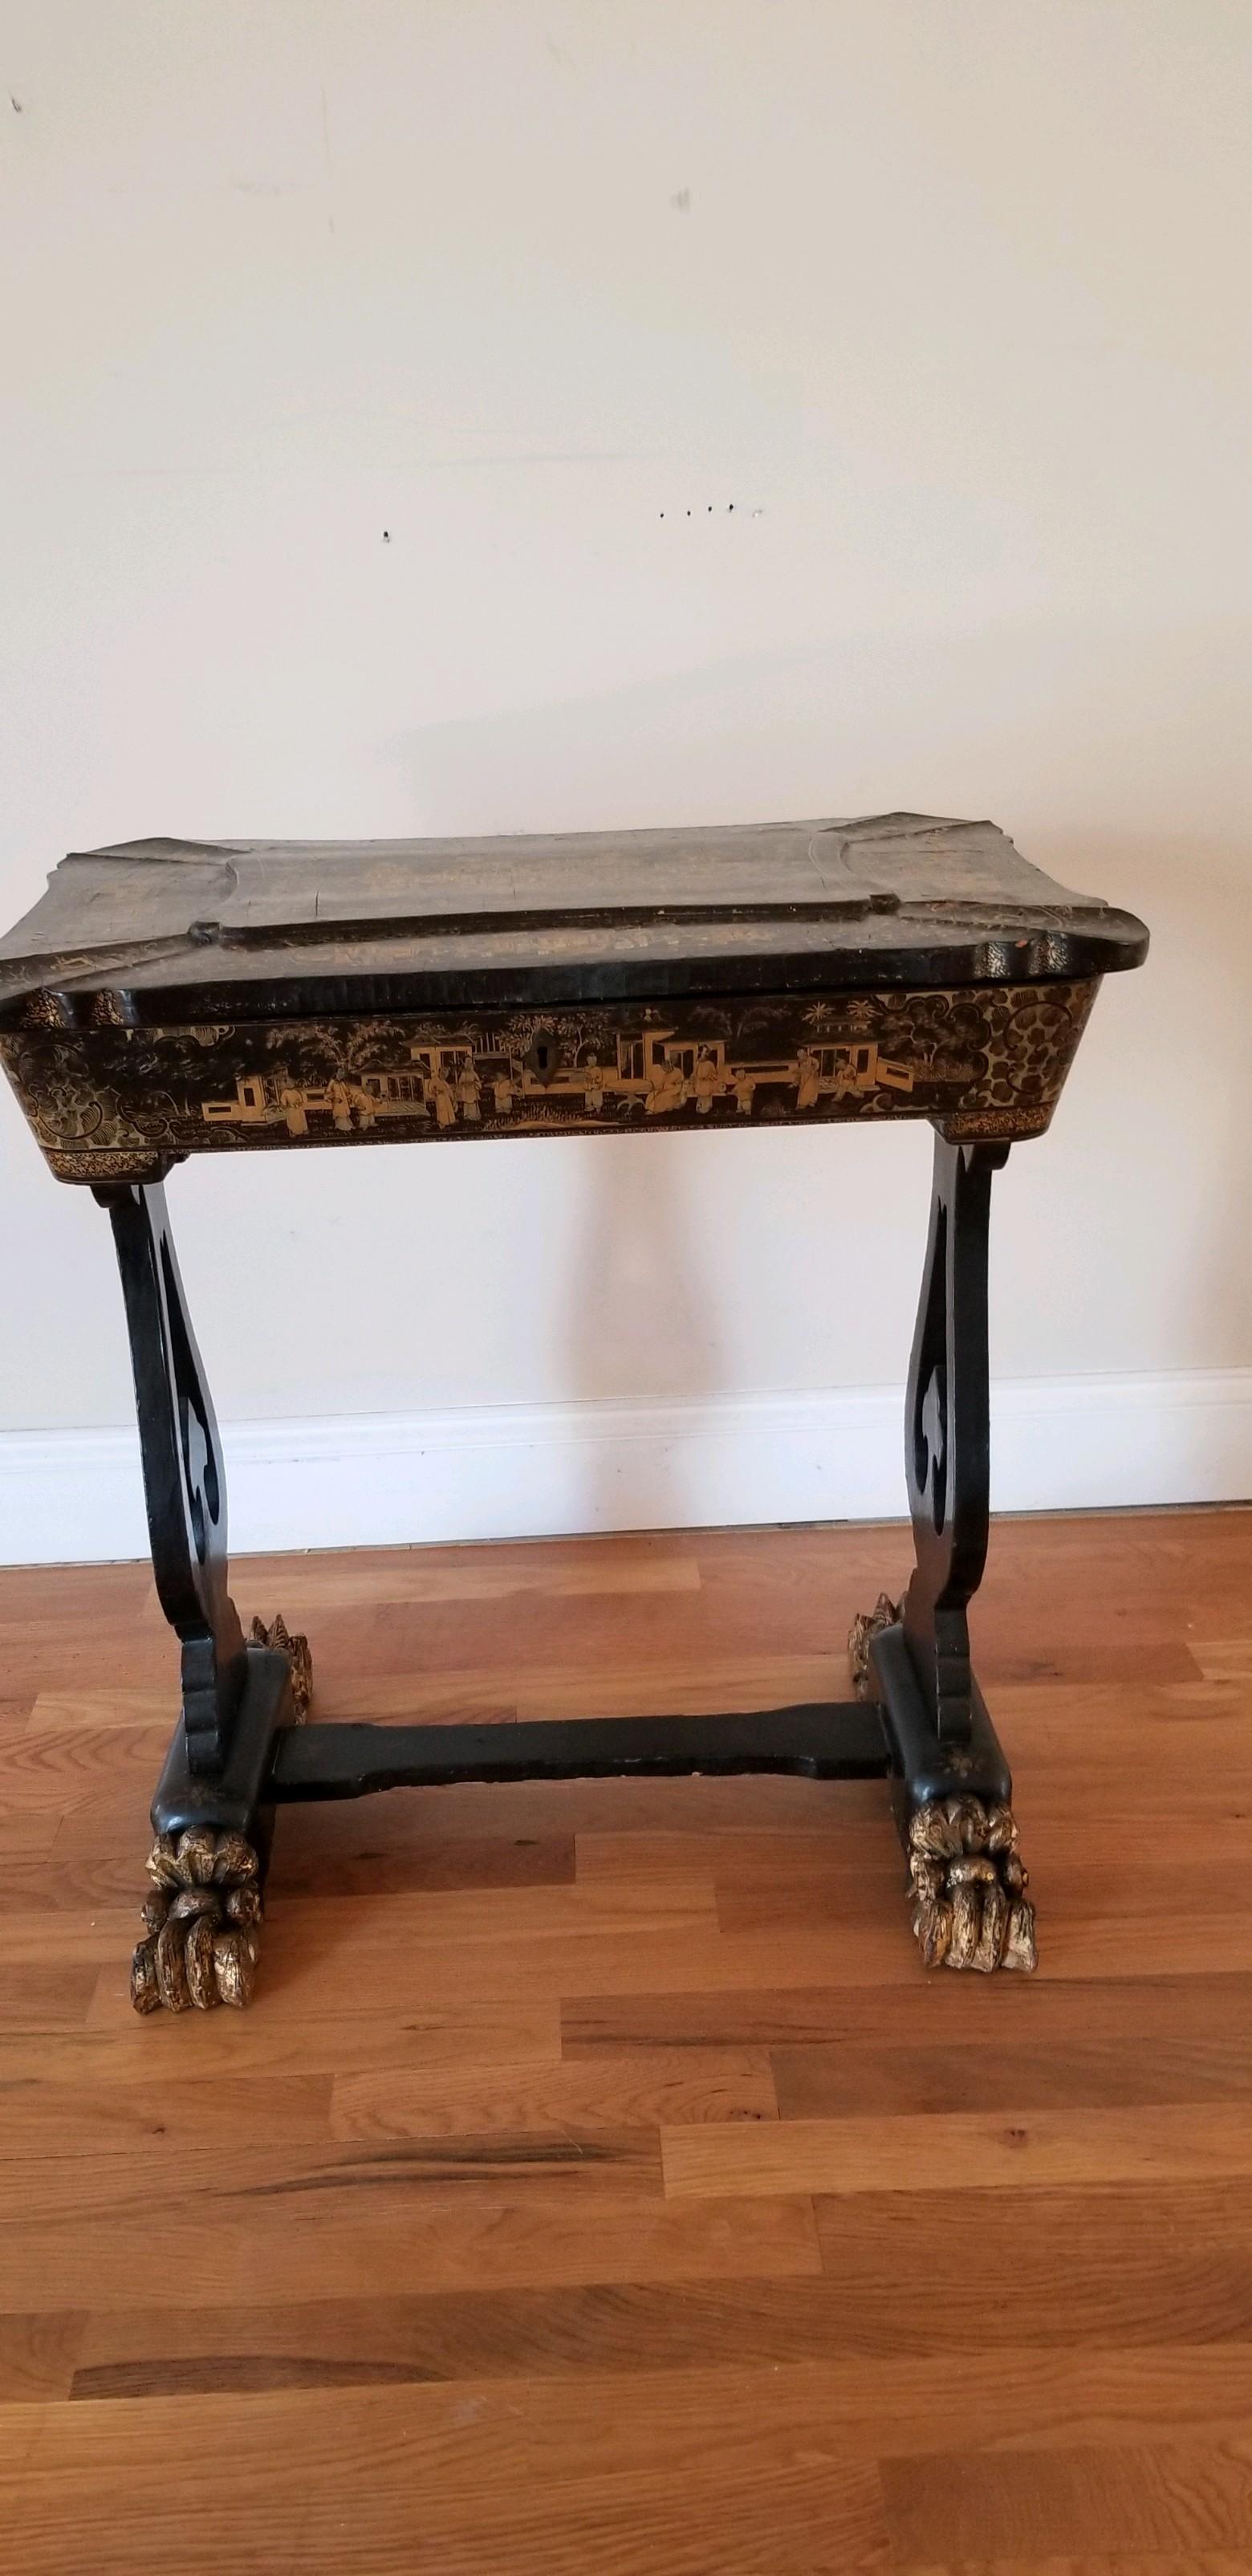 This is a rarity. An 18th early-19th century chinoiserie sewing table of exquisite form. It is the quintessential refinement for the lady's parlor of the period. Chinoiserie was all the rage as the markets were opened up for tea trading then